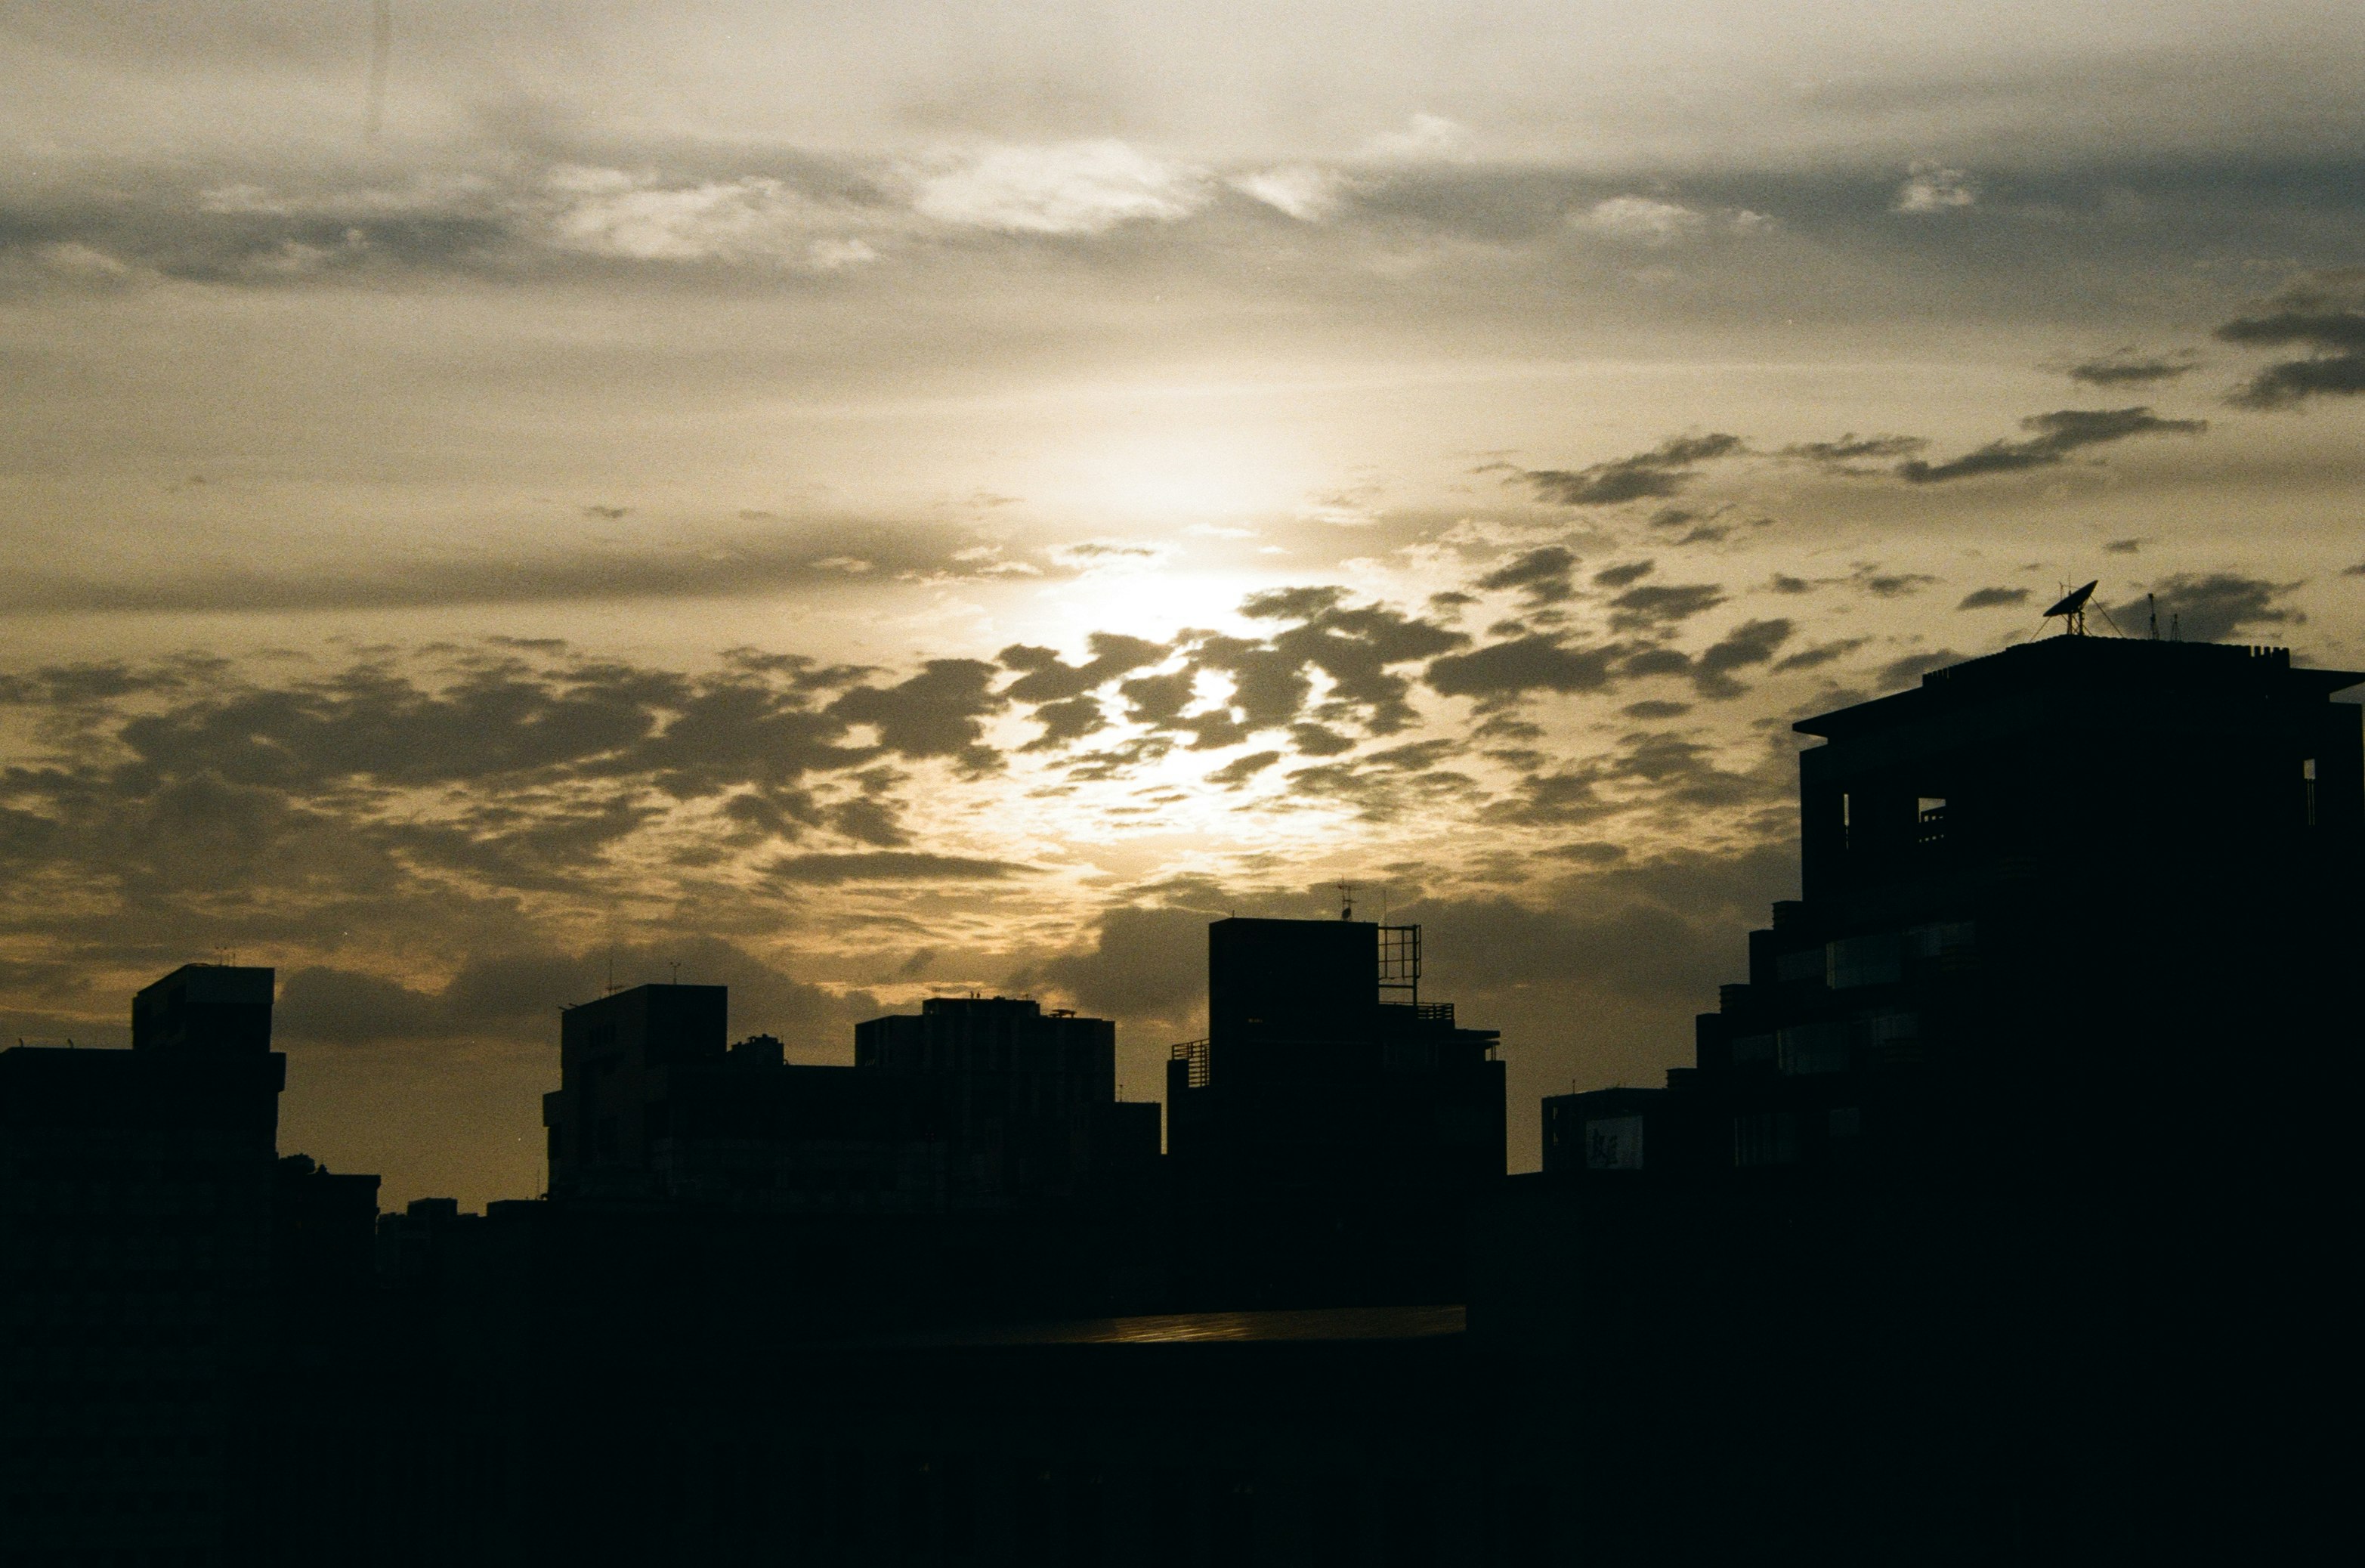 silhouette of buildings under cloudy sky during sunset